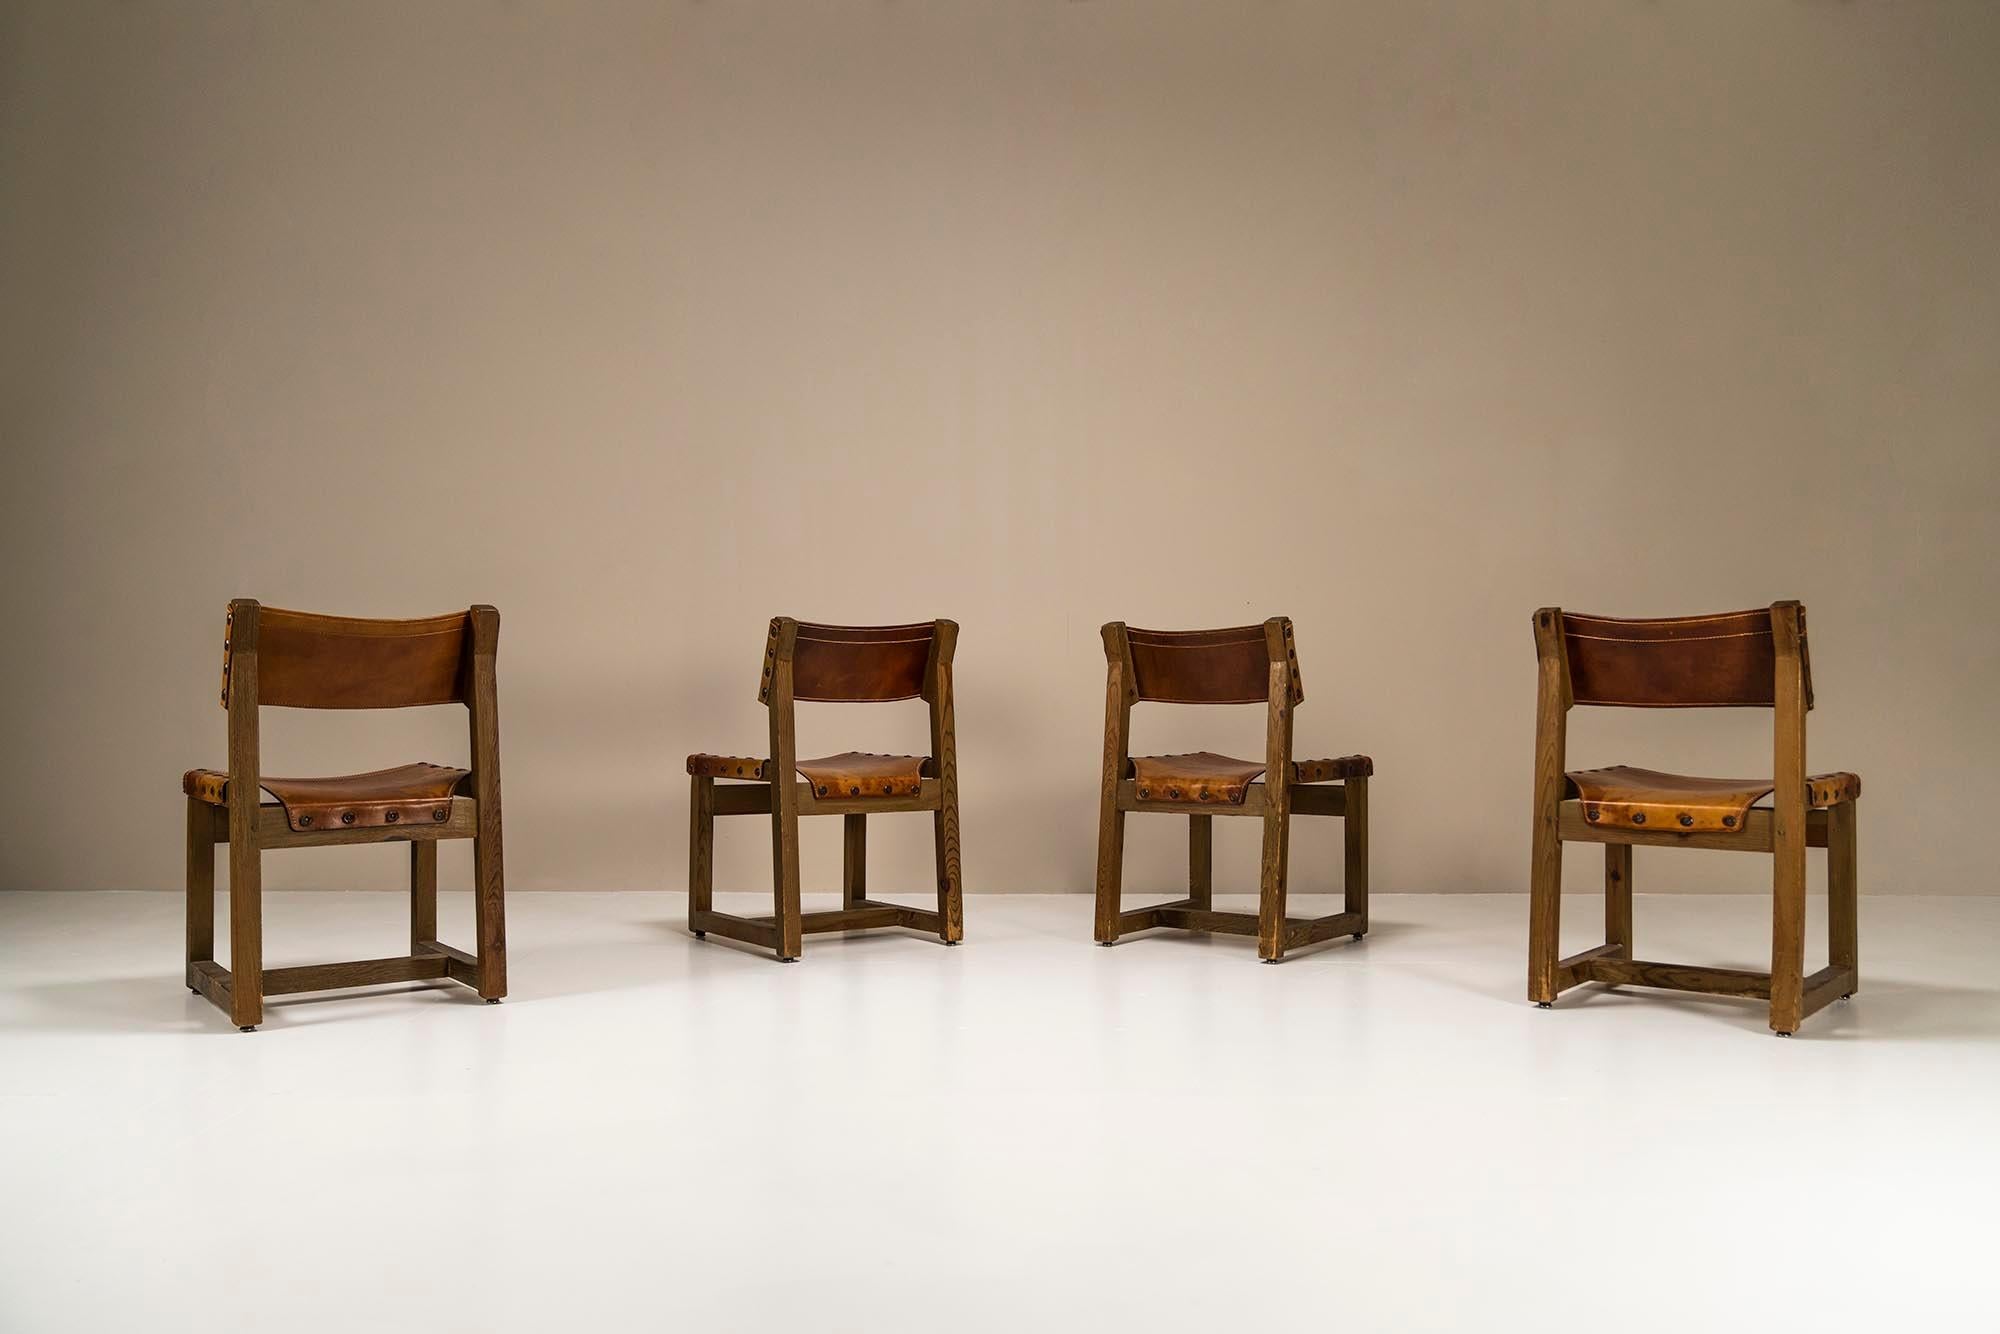 Spanish Biosca Set of 4 Chairs in Pine and Cognac Saddle Leather, Spain, 1960s For Sale